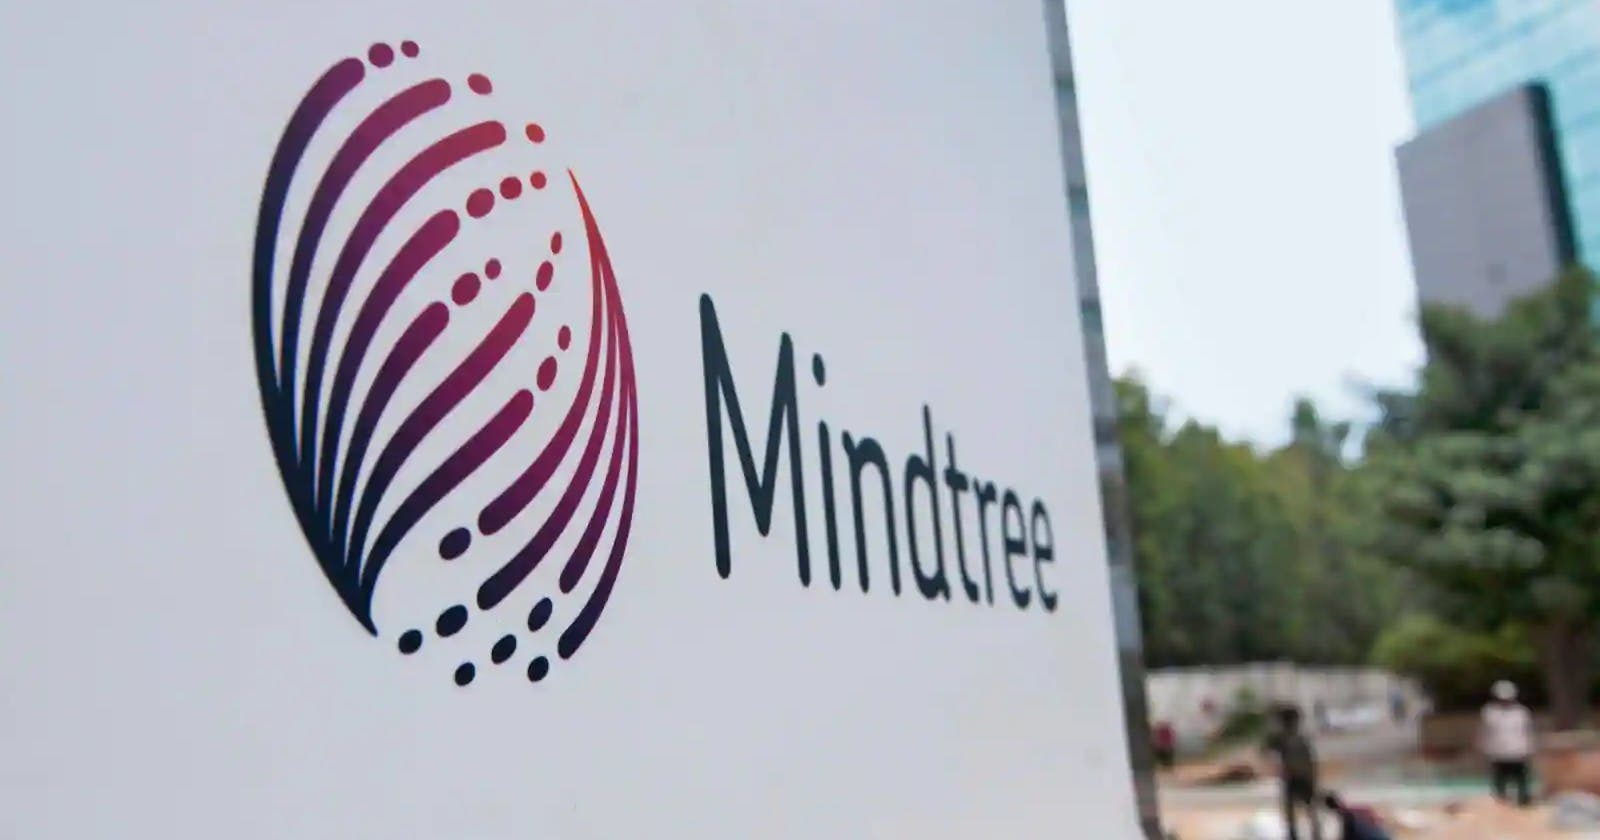 LTI-Mindtree On-Campus Drive - Complete Guidance and Experience